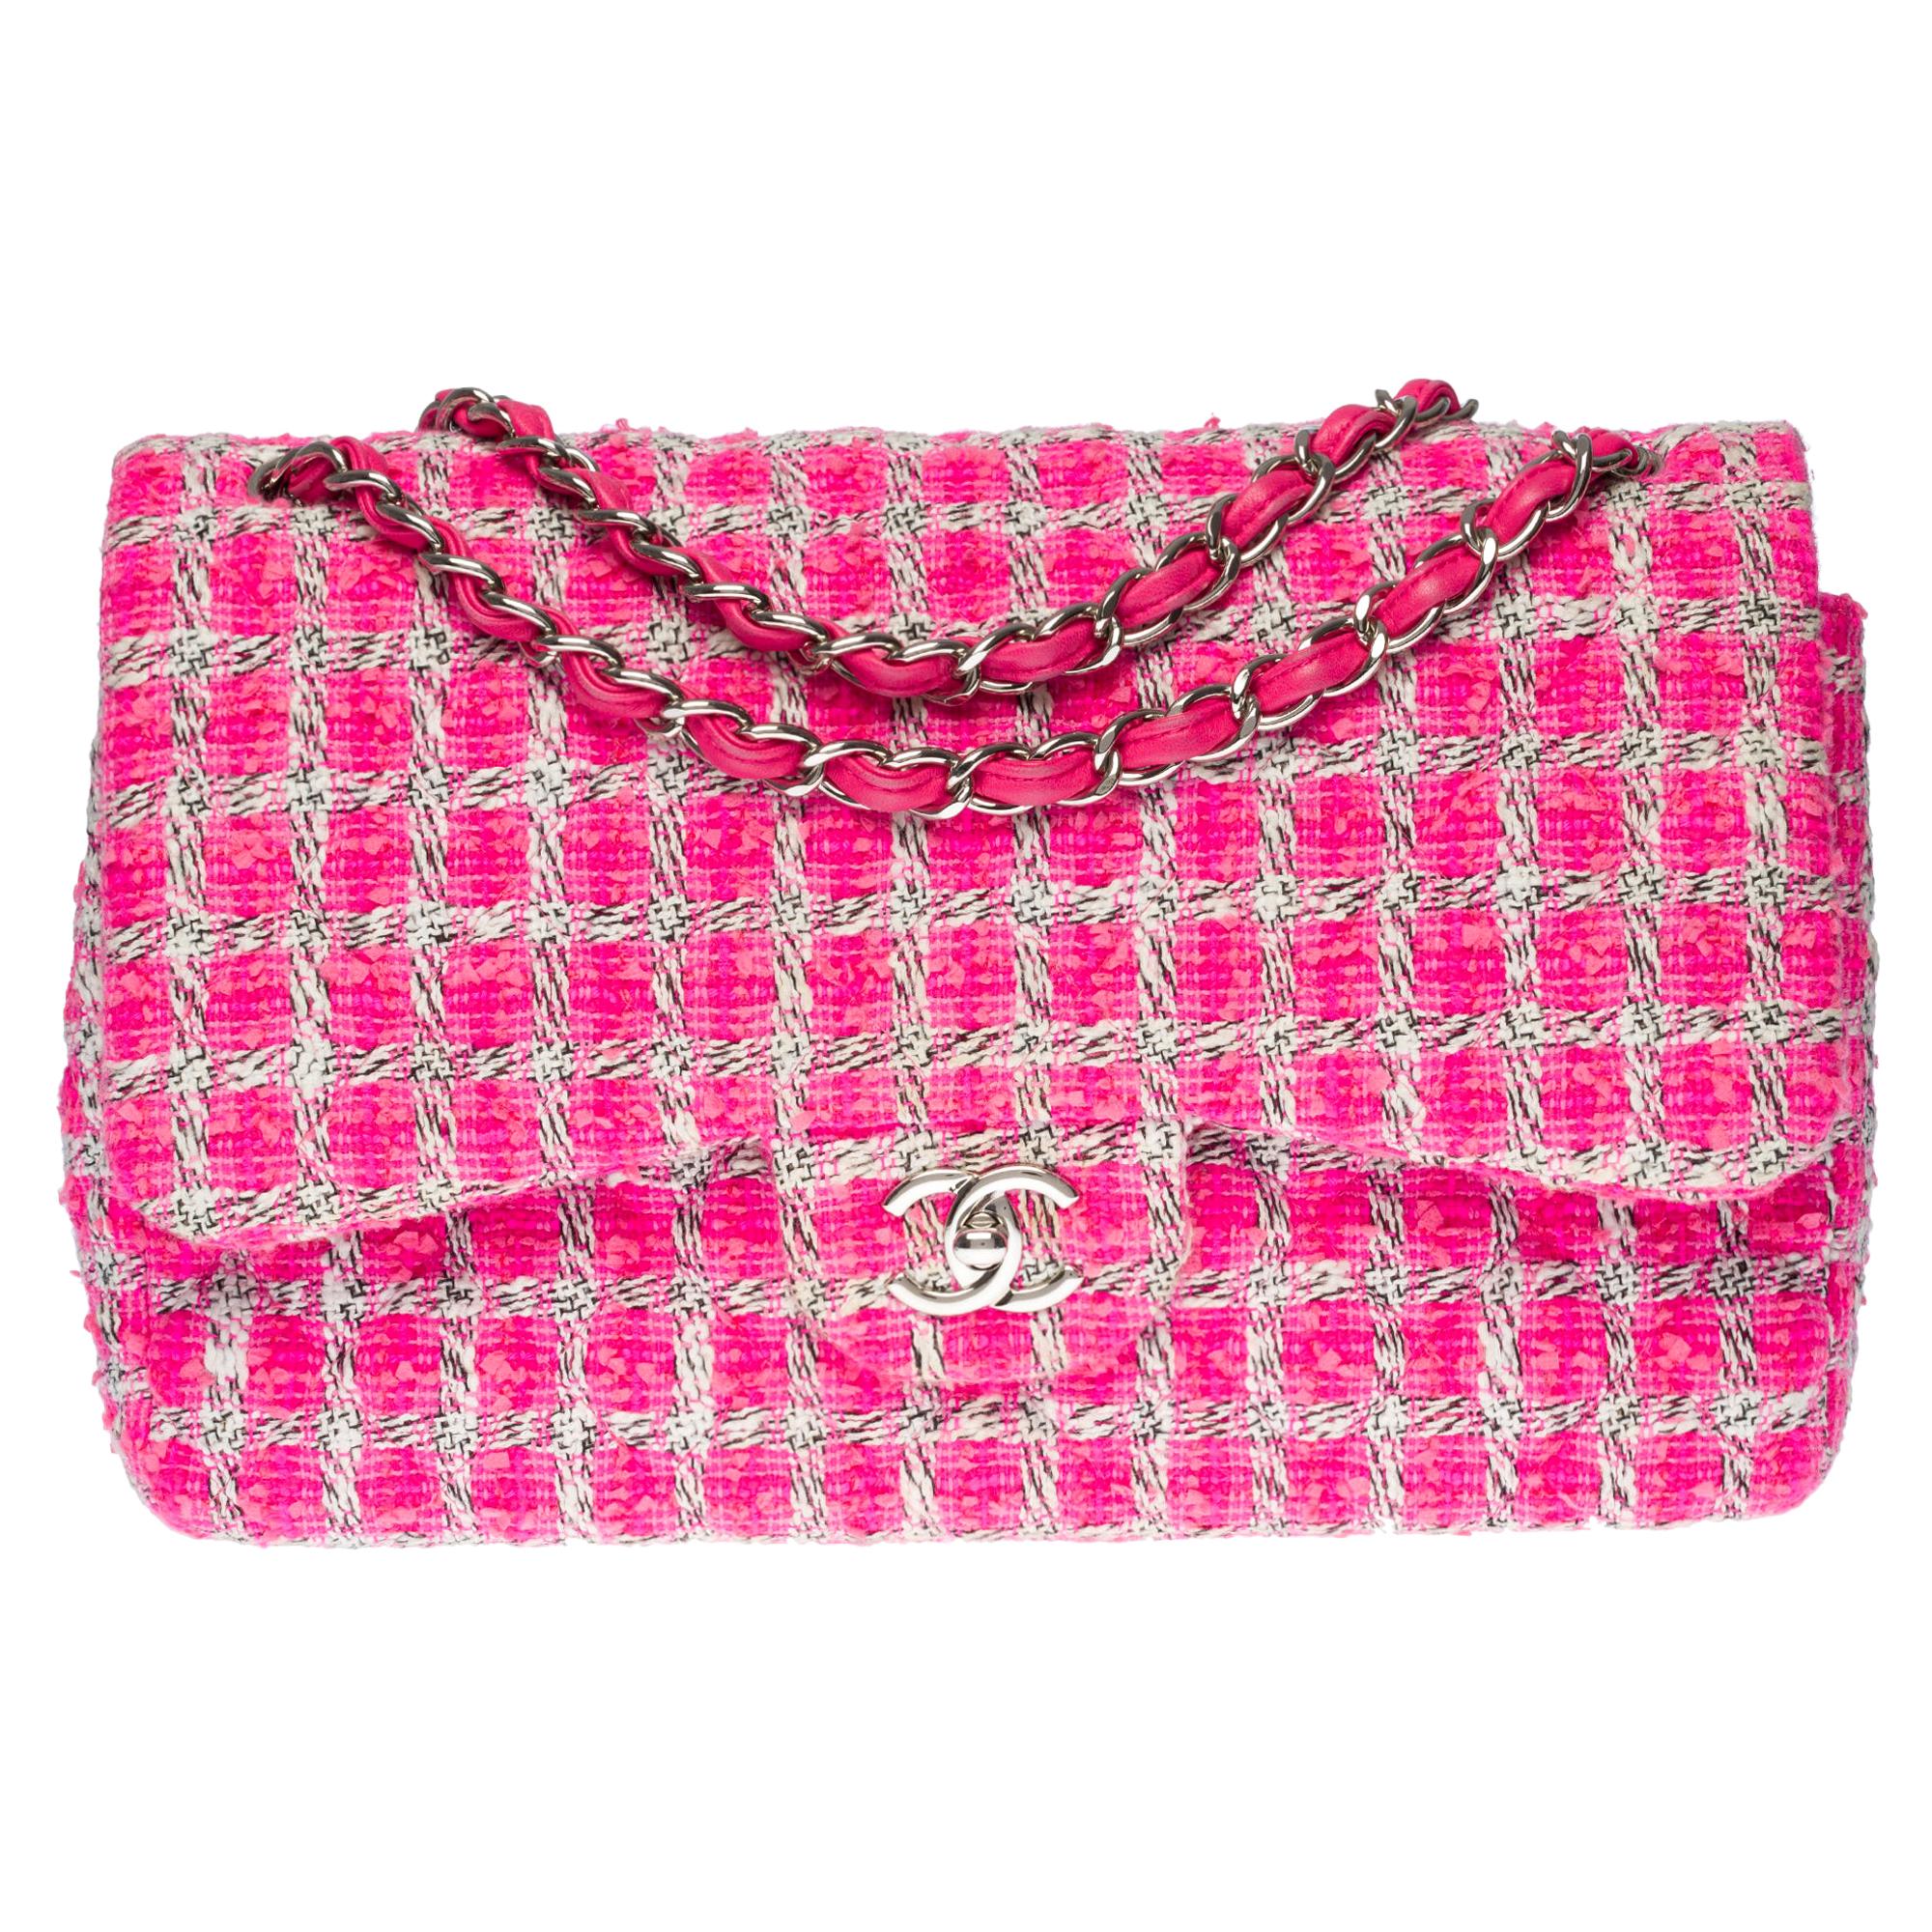 Limited Edition Chanel Timeless Jumbo Shoulder bag in Pink Tweed with SHW